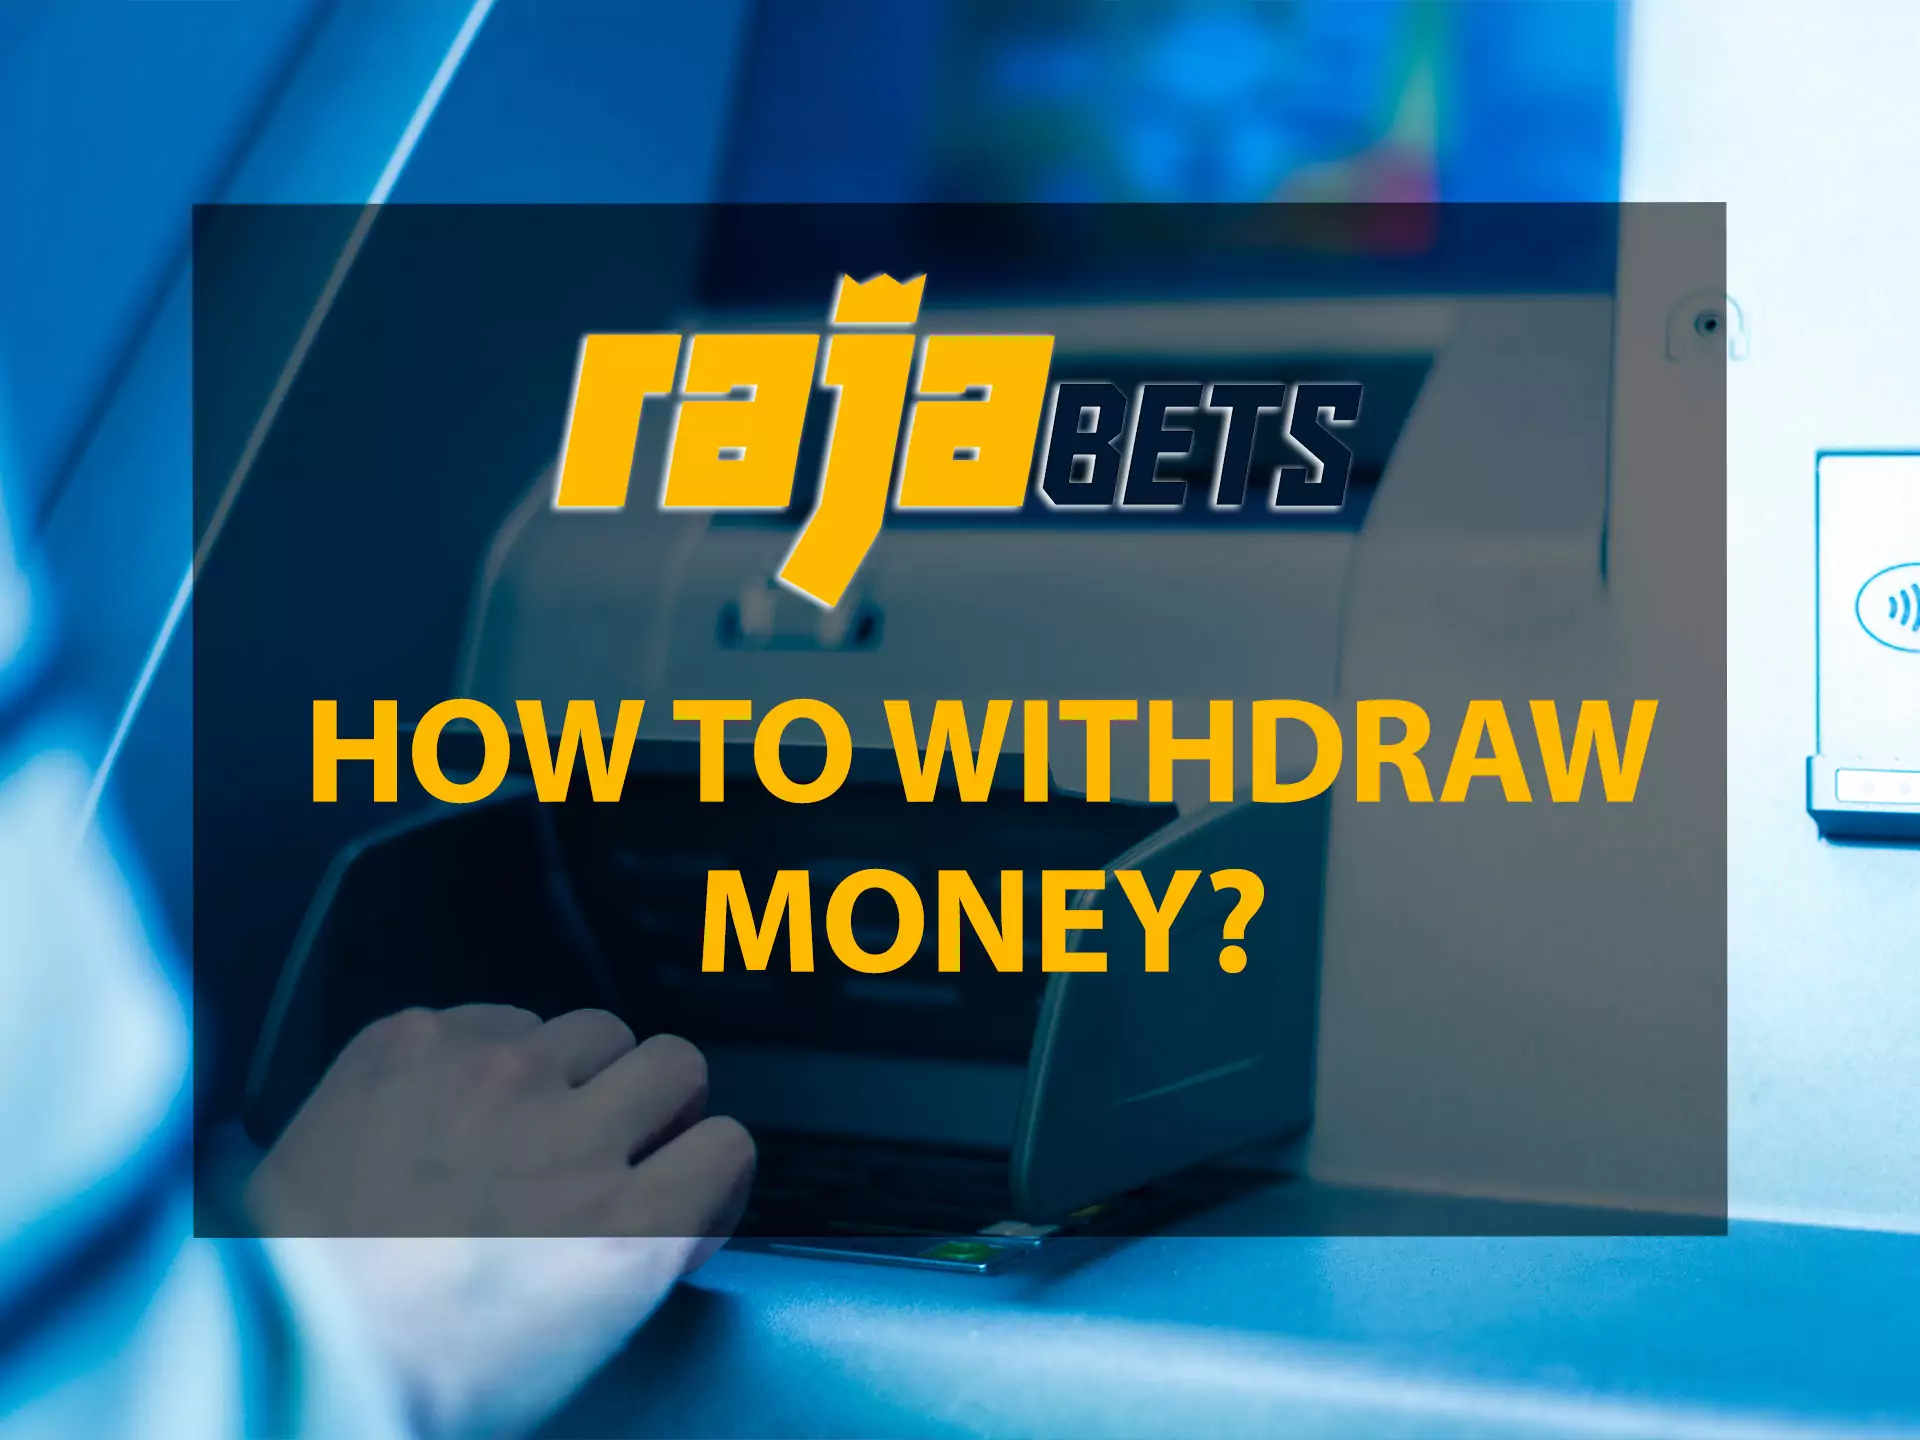 You should be verified at Rajabets to withdraw winnings.